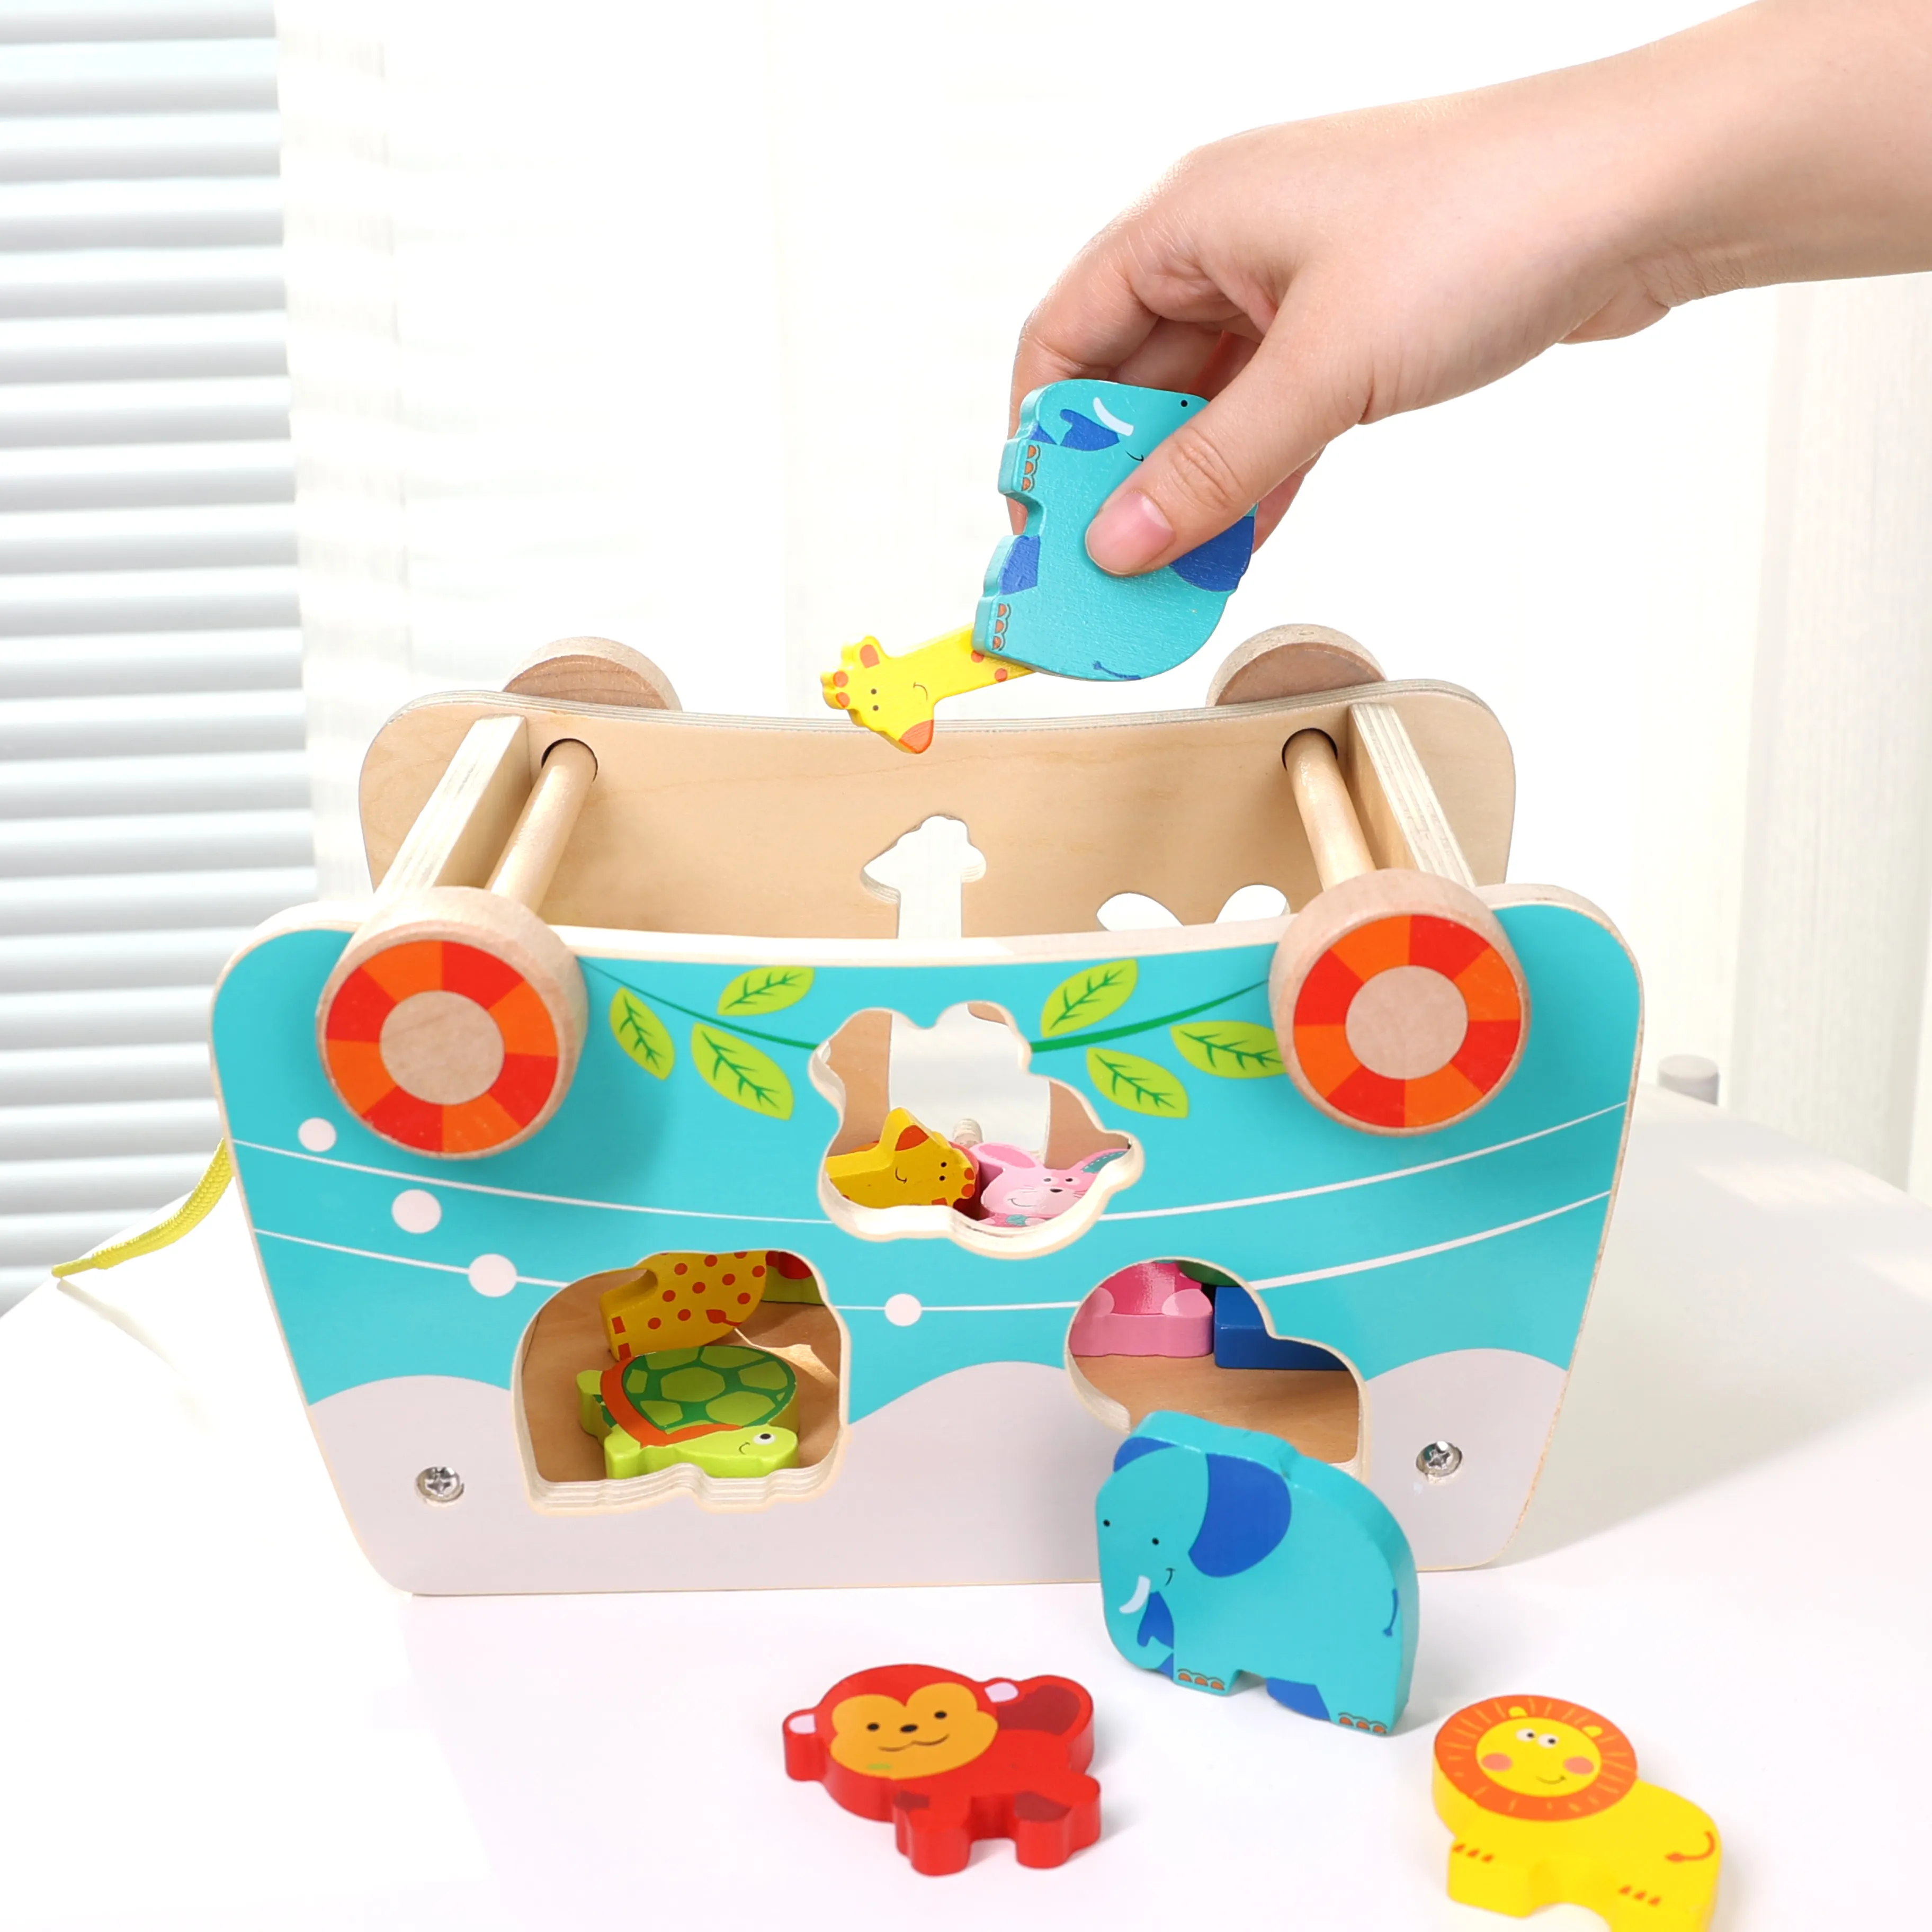 Wooden Educational Toys Shape Block Matching Box wooden pull along car Shape Sorter Toy